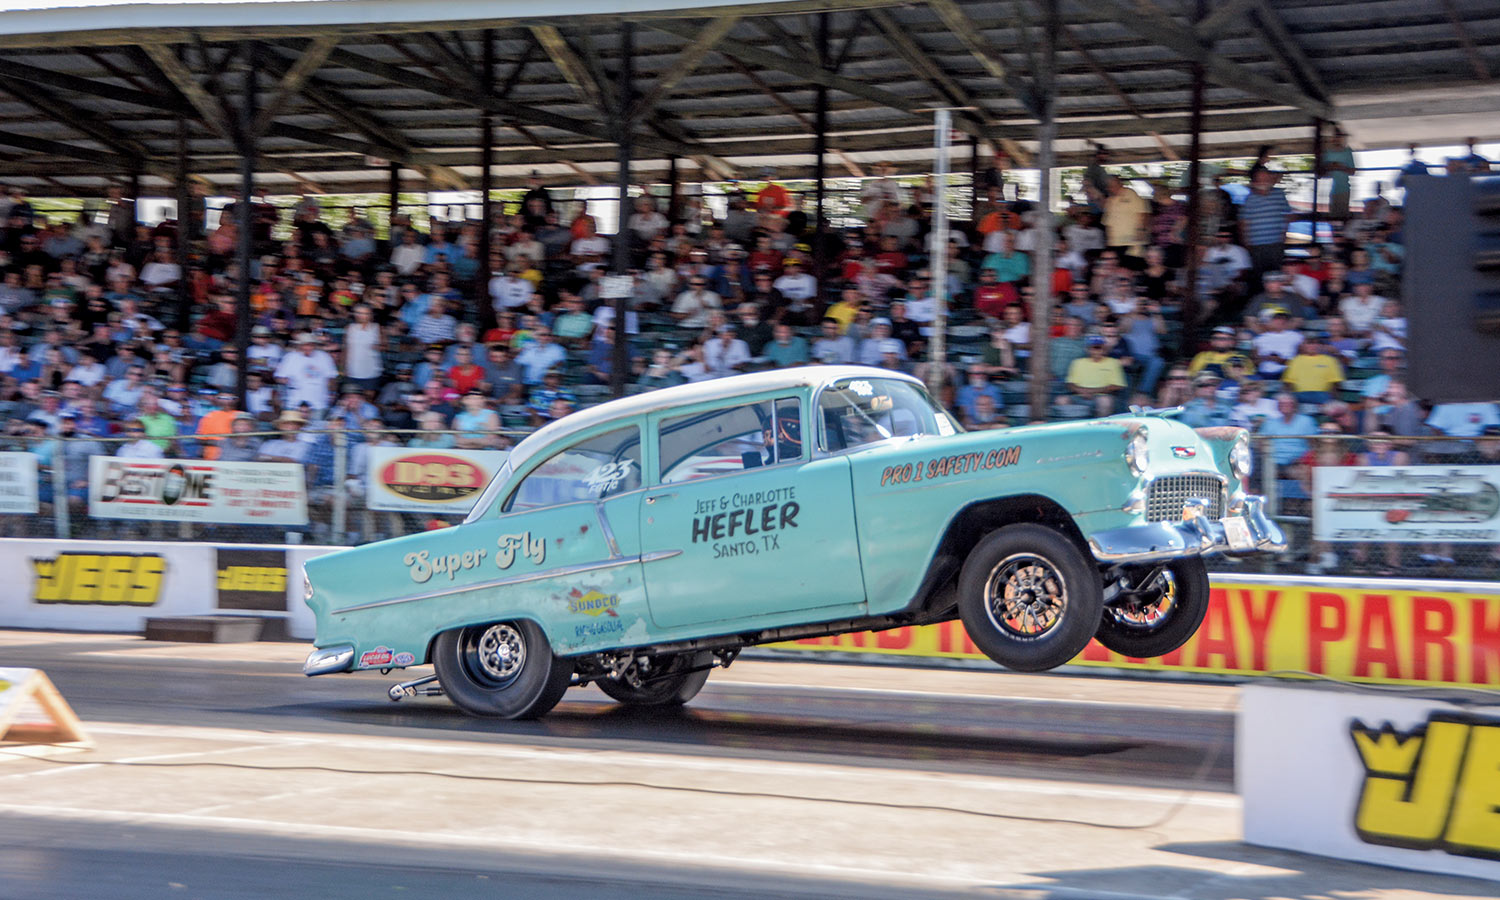 Jeff and Charlotte Hefler’s “Super Fly” ’55 Chevy 210